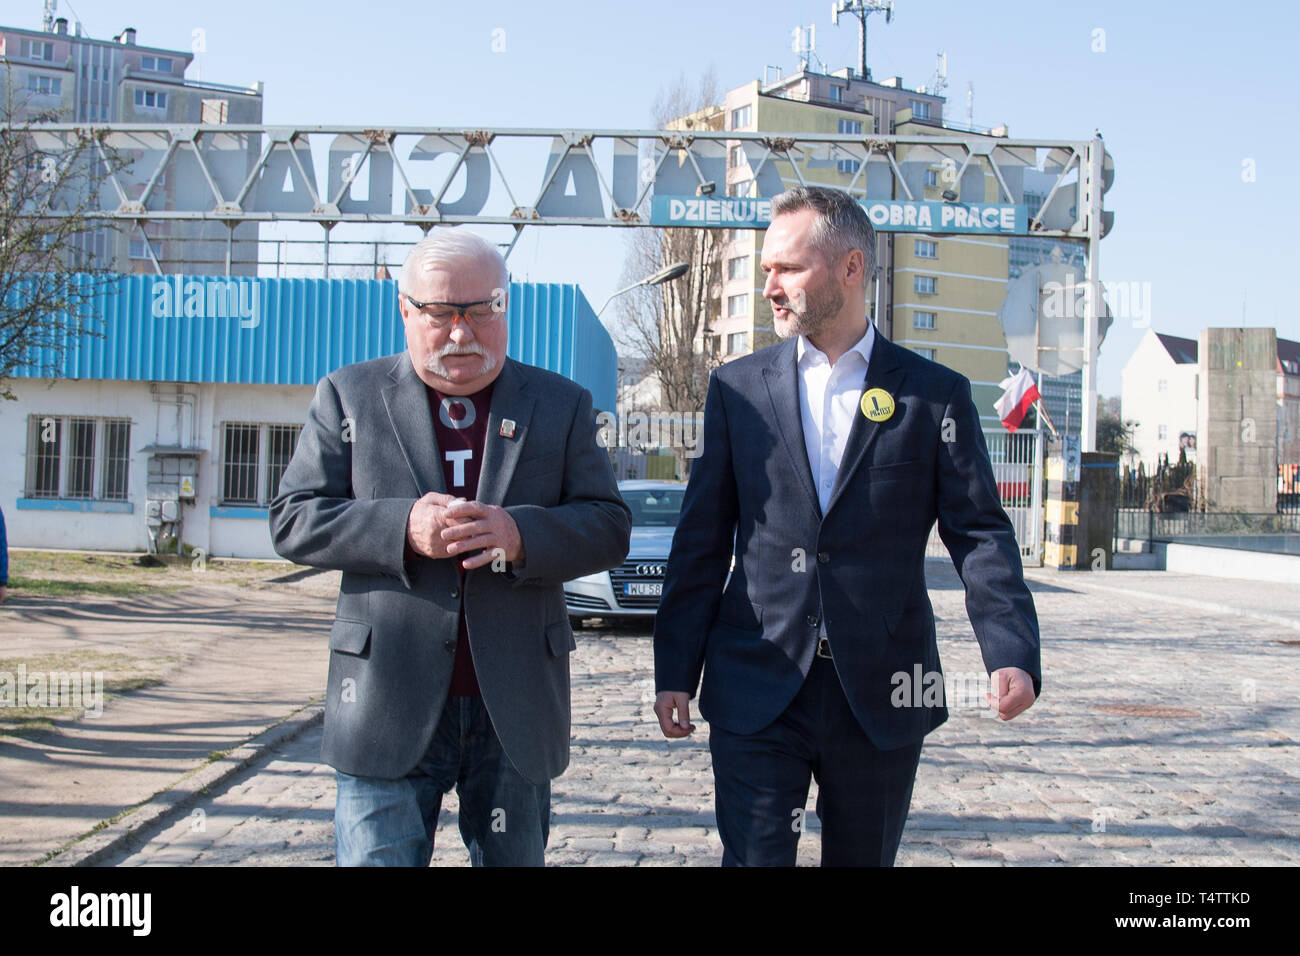 Former president of Poland and Solidarity leader Lech Walesa and his son Jaroslaw Walesa hold a press conference in front of Gate 2 at the Gdansk Ship Stock Photo